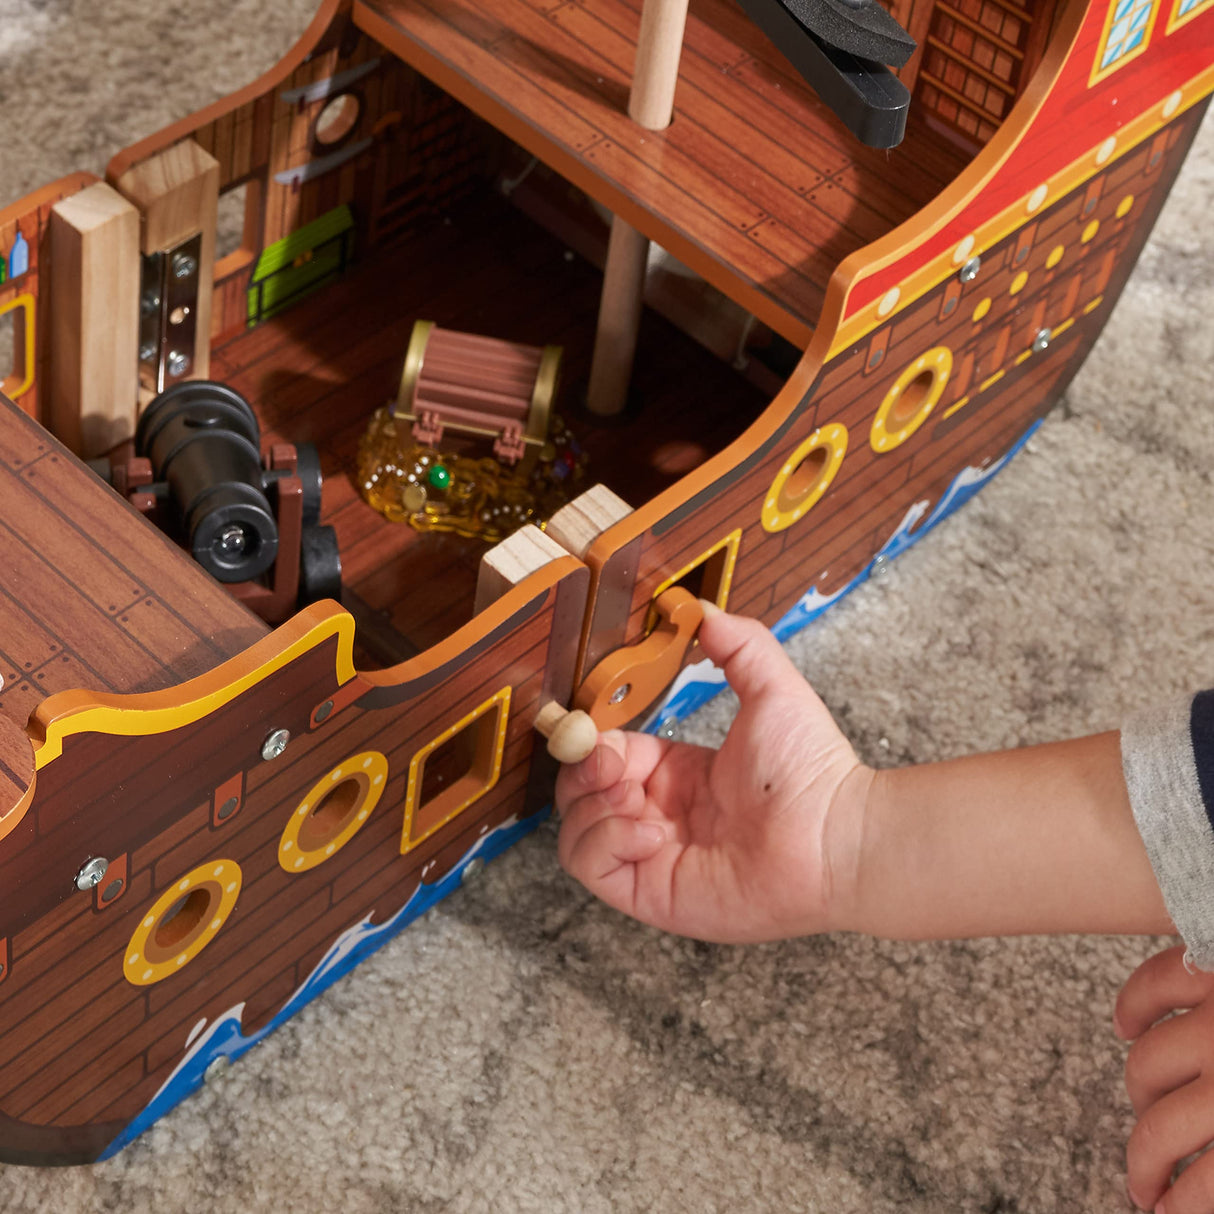 KidKraft Adventure Bound™: Wooden Pirate Ship Play Set with Lights and Sounds, Pirate Figures, 8 Pieces Included, Gift for Ages 3+